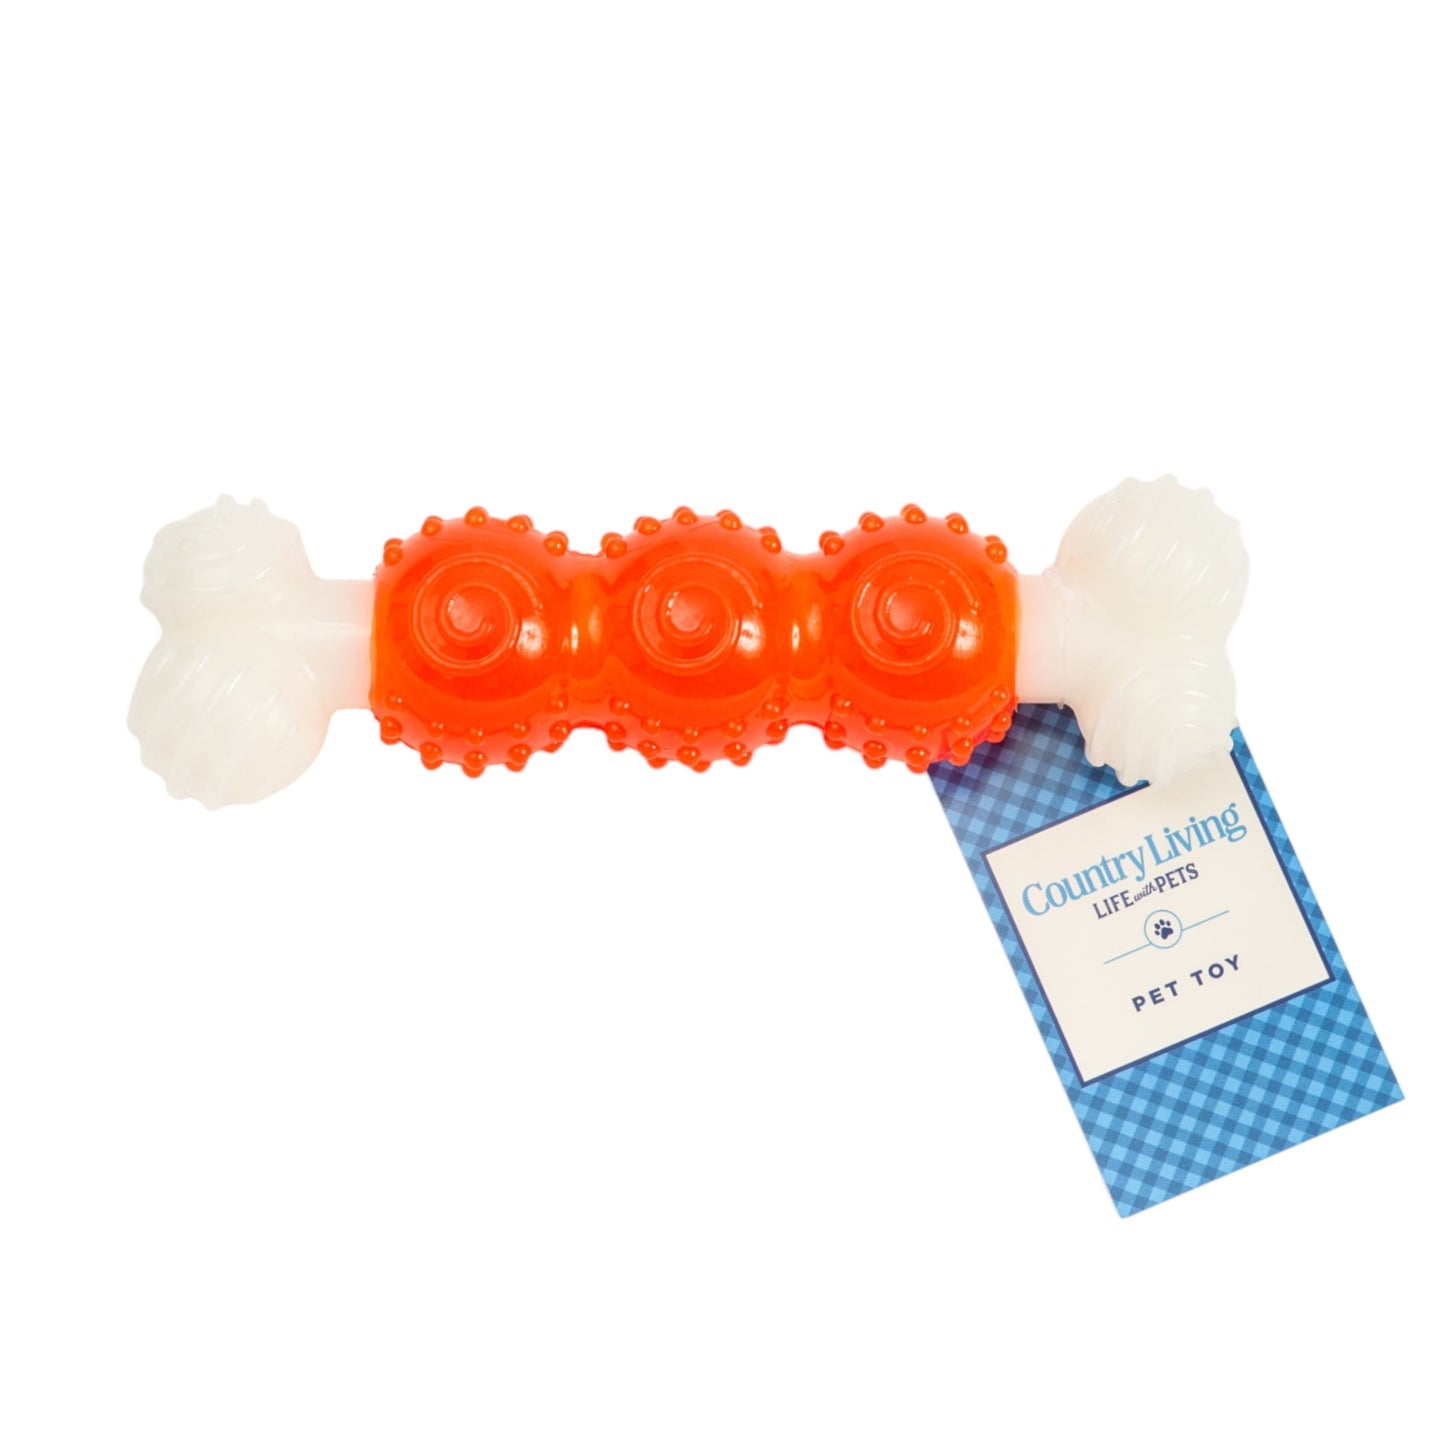 Country Living Bone-a-Treat Dog Chew Toy